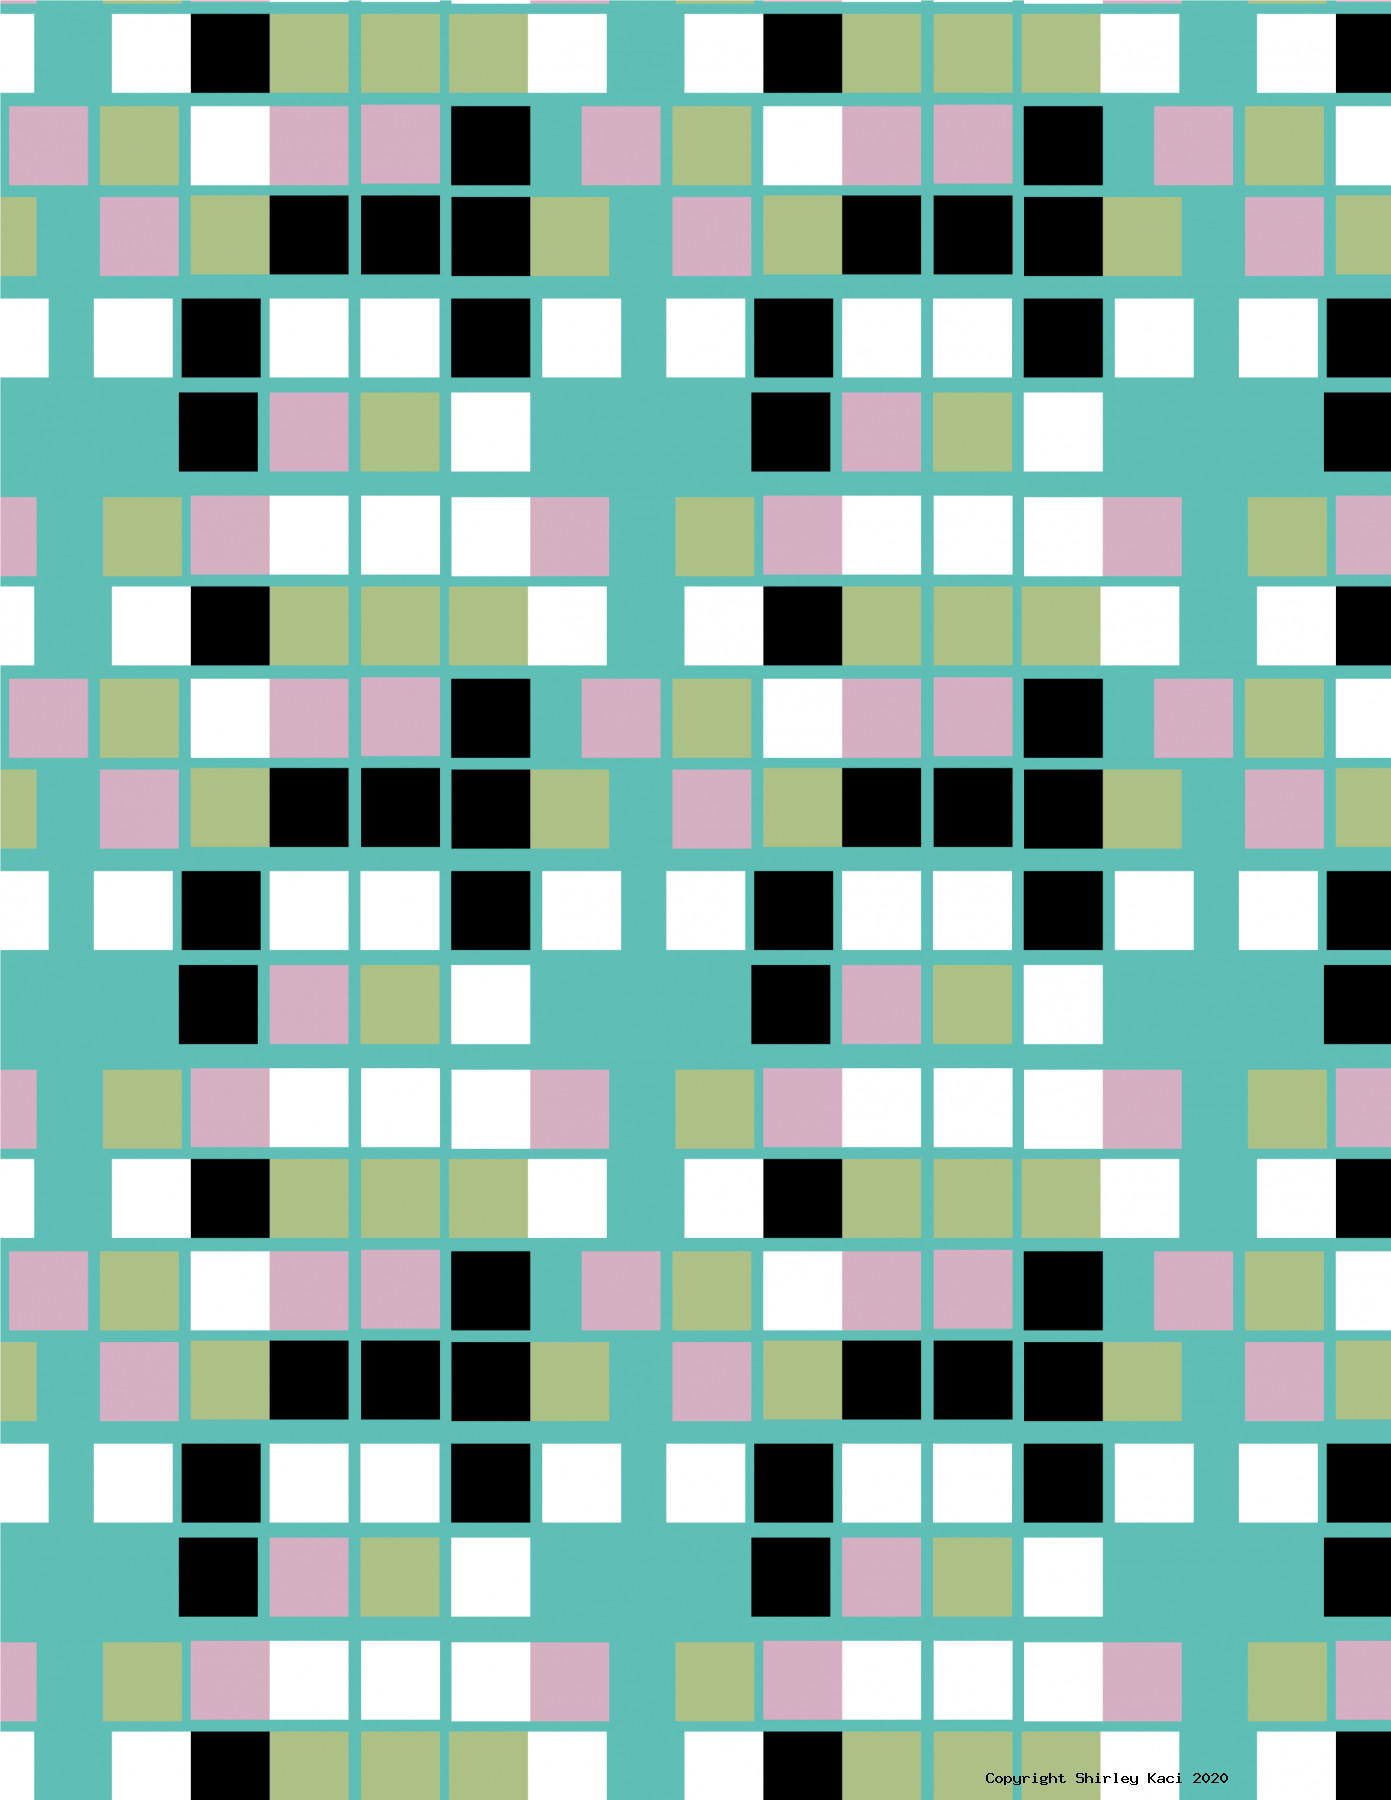 A Vido Clip Of A combination Of Patterns